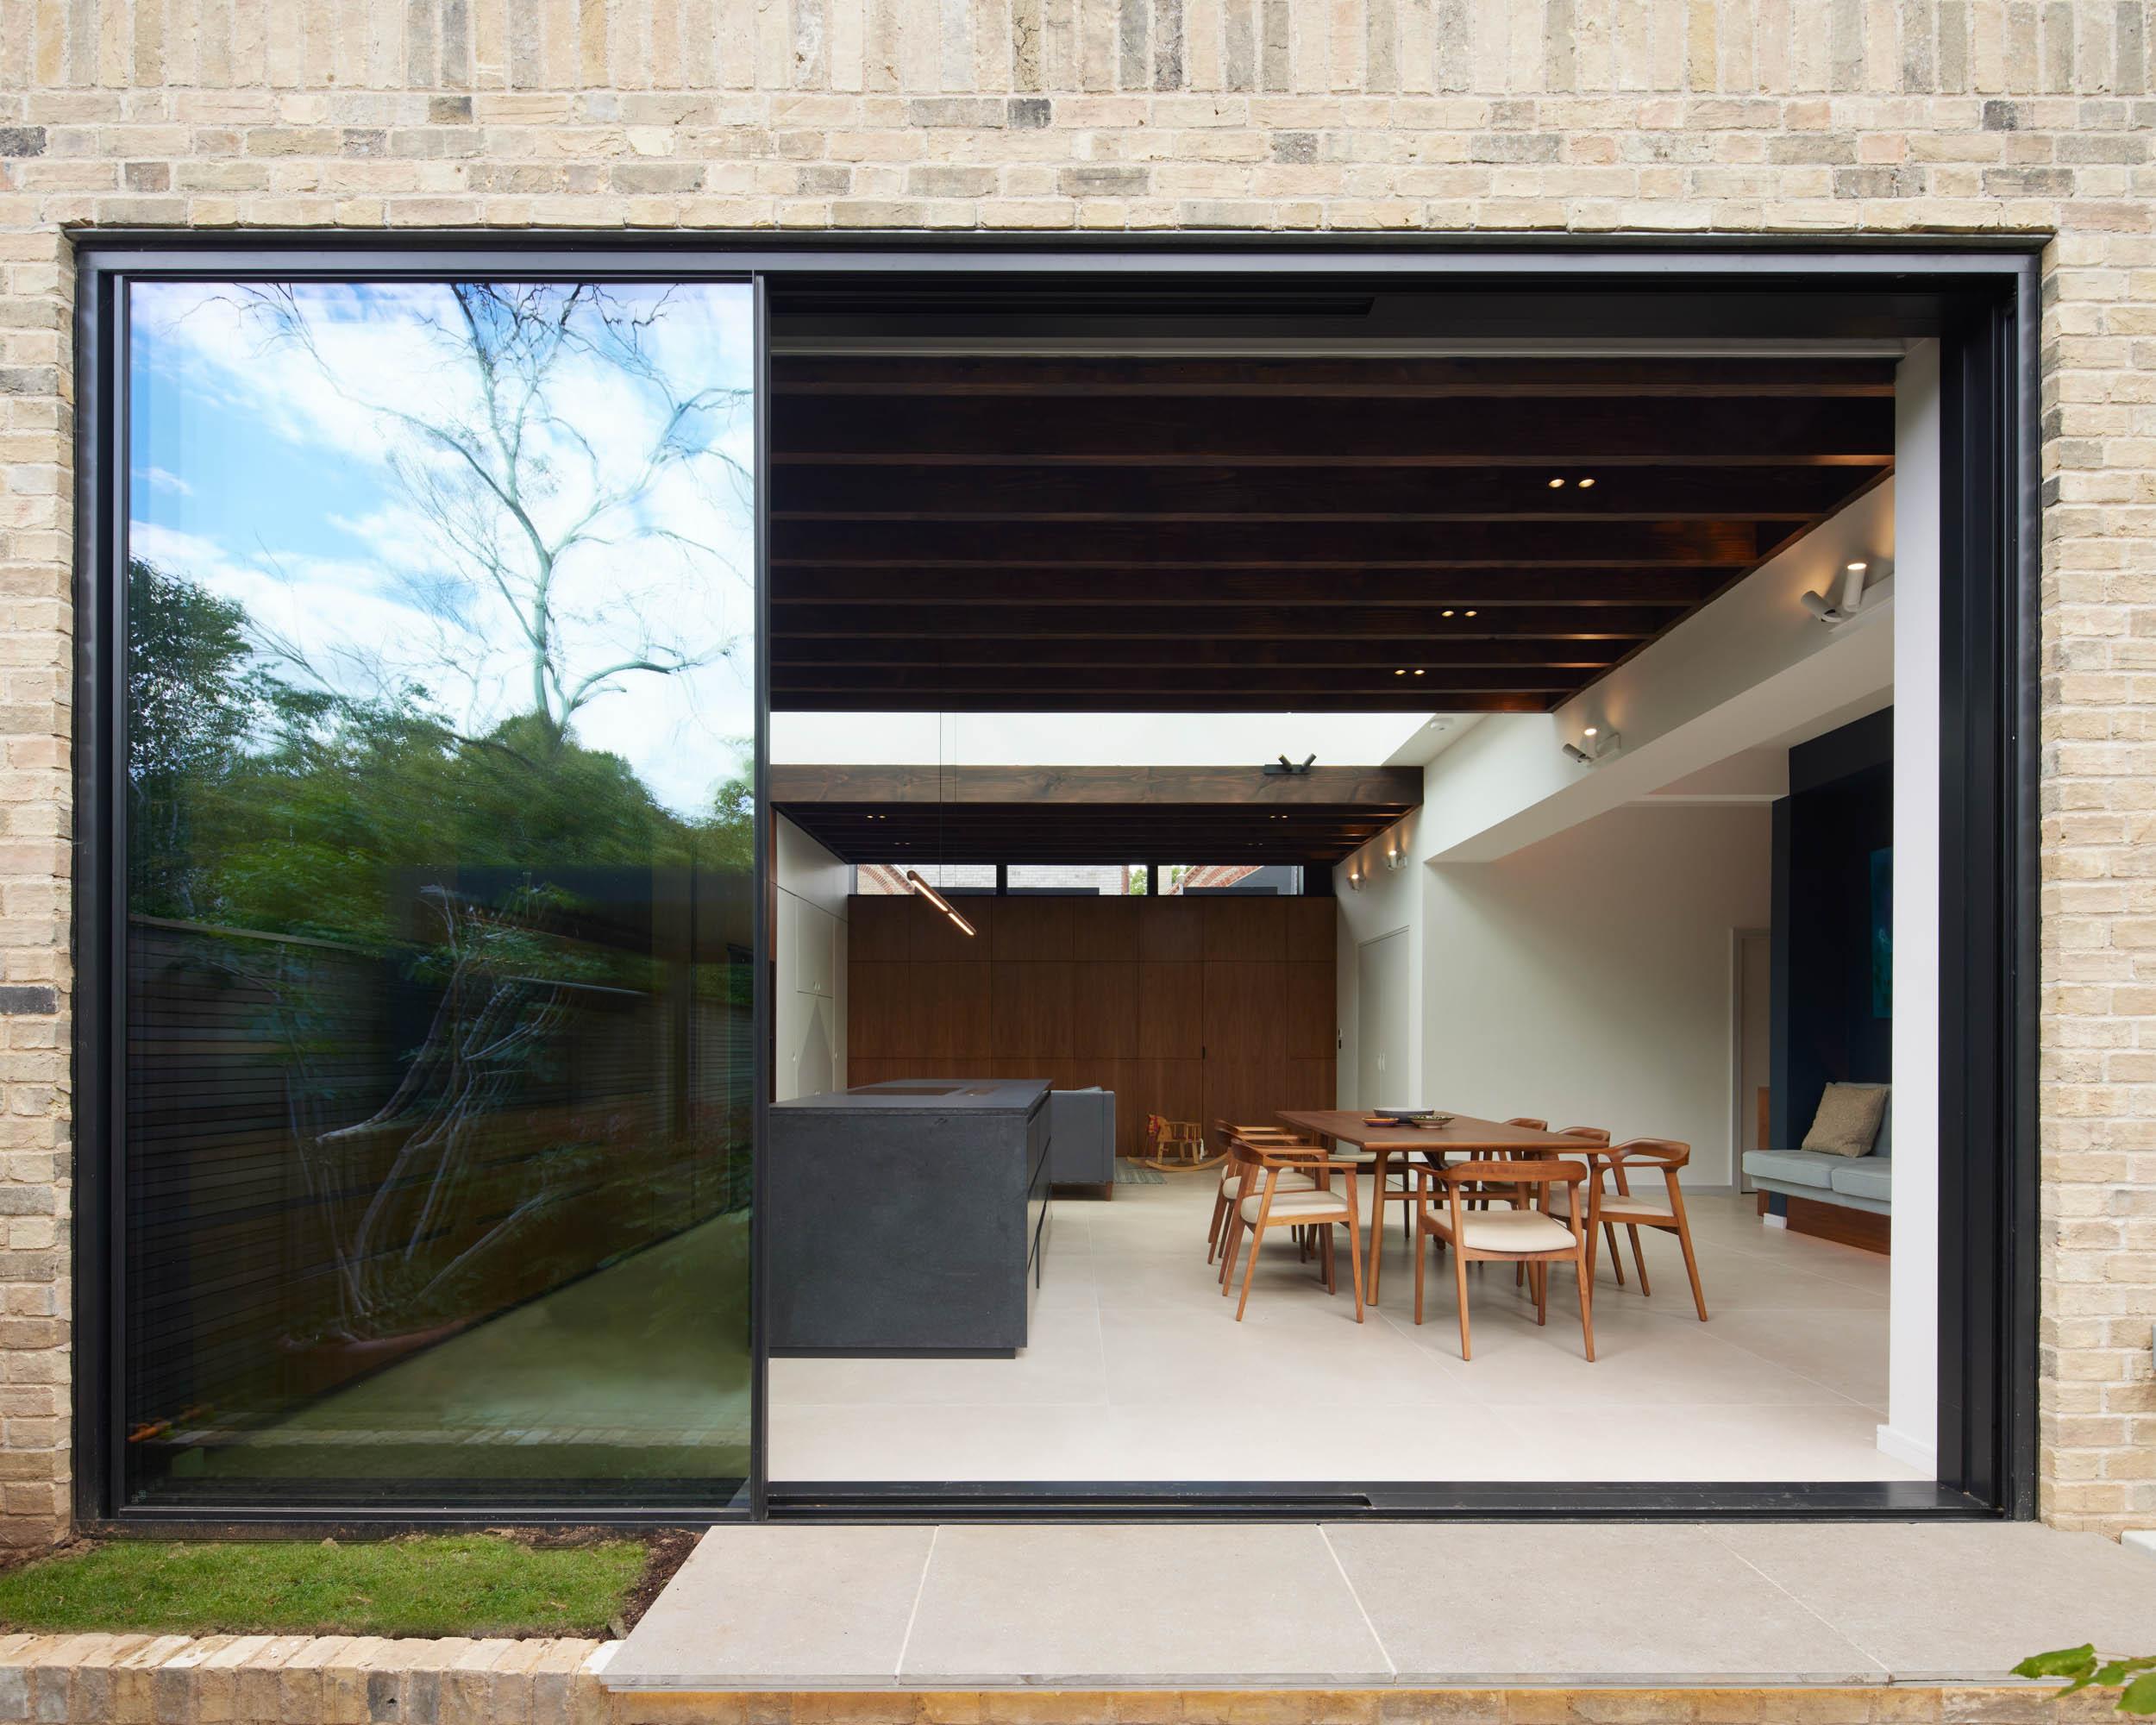 view from the garden of a contemporary kitchen and dining area | cdc studio cambridge architects